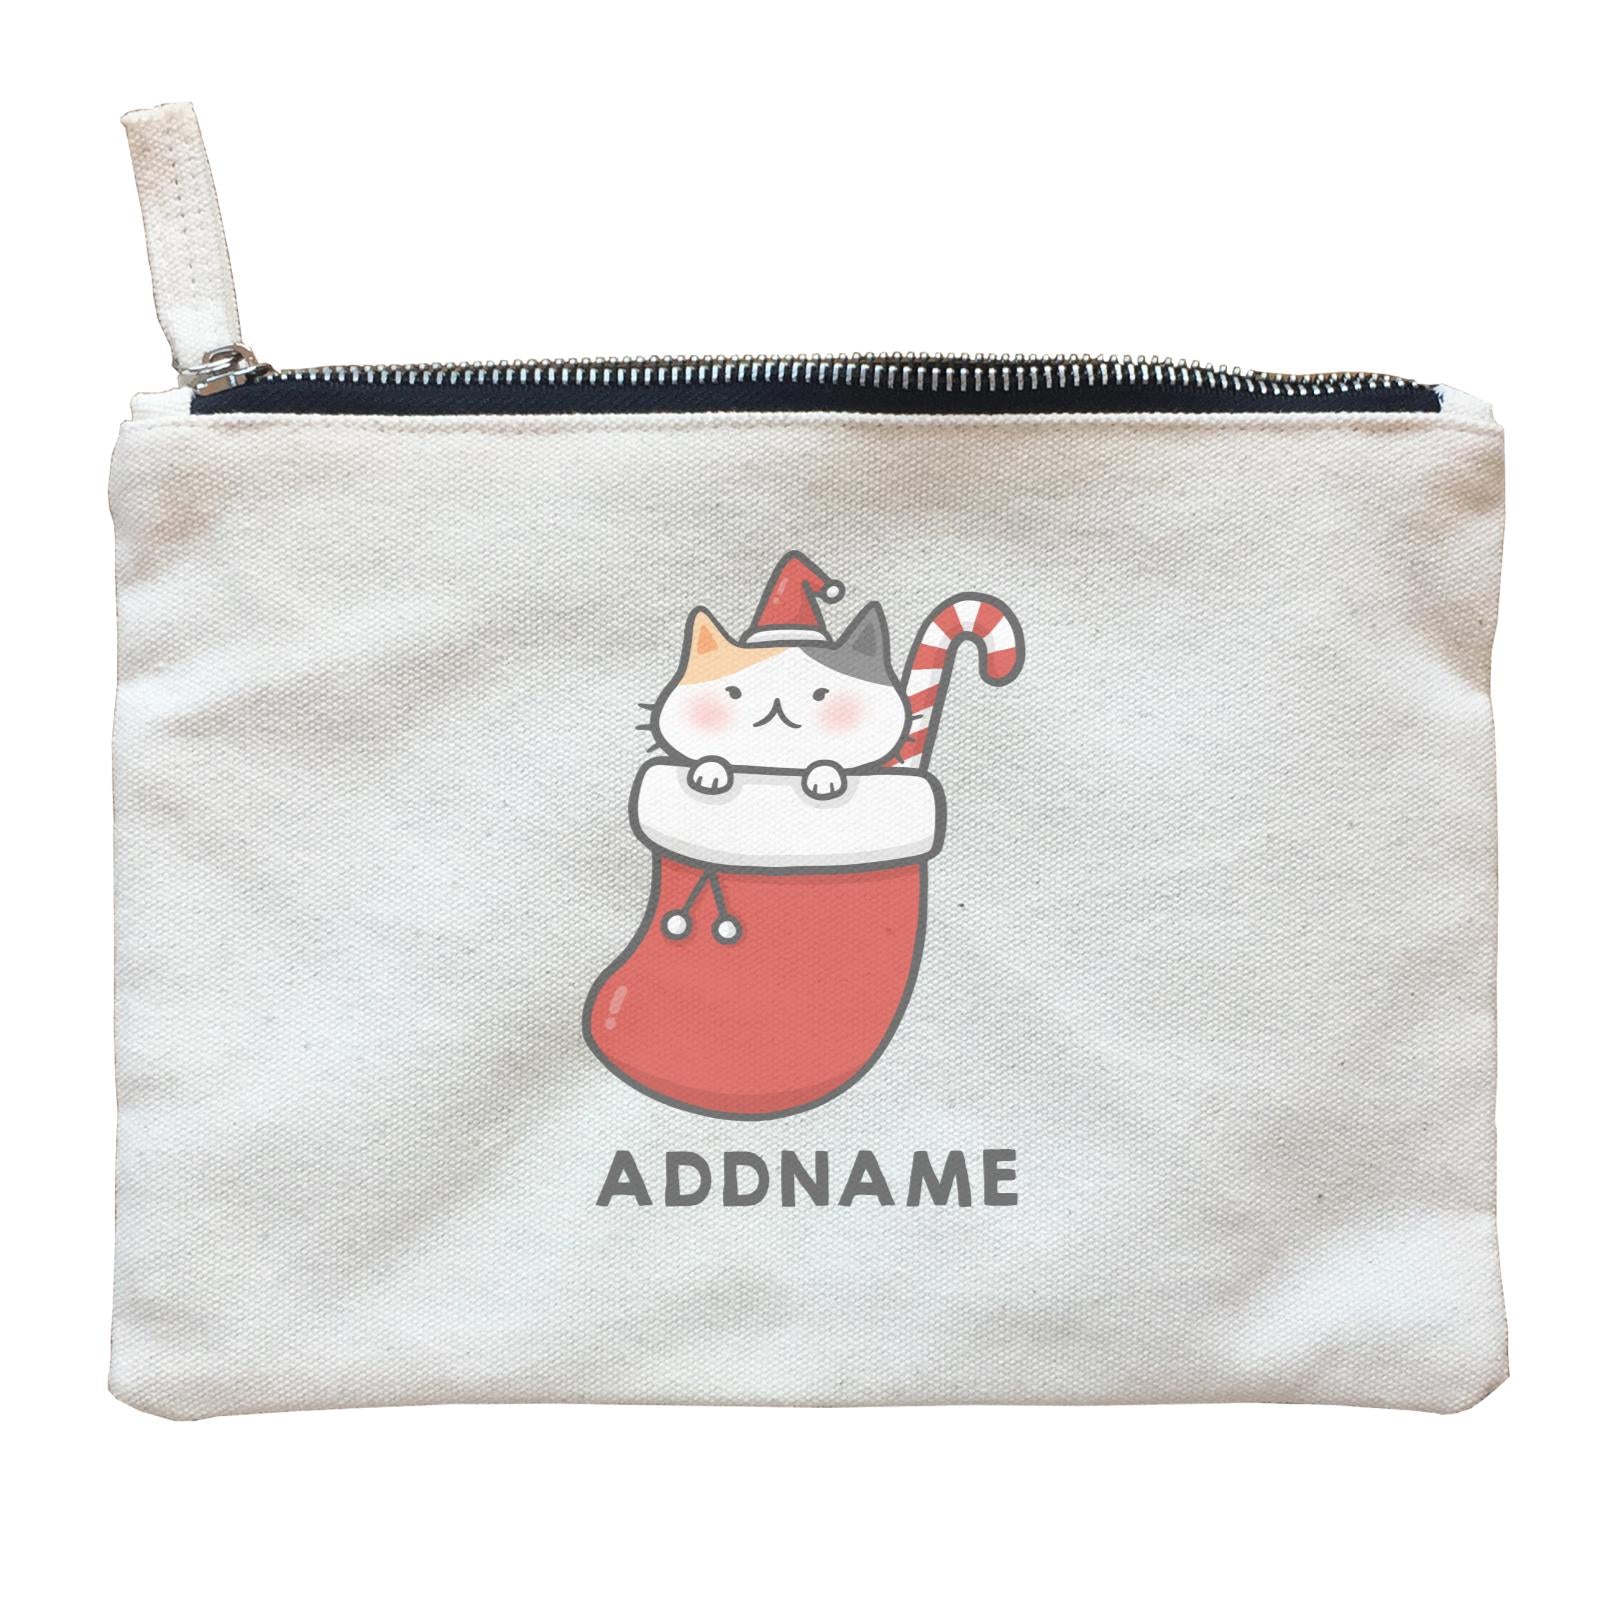 Xmas Cute Cat In Christmas Sock Addname Accessories Zipper Pouch